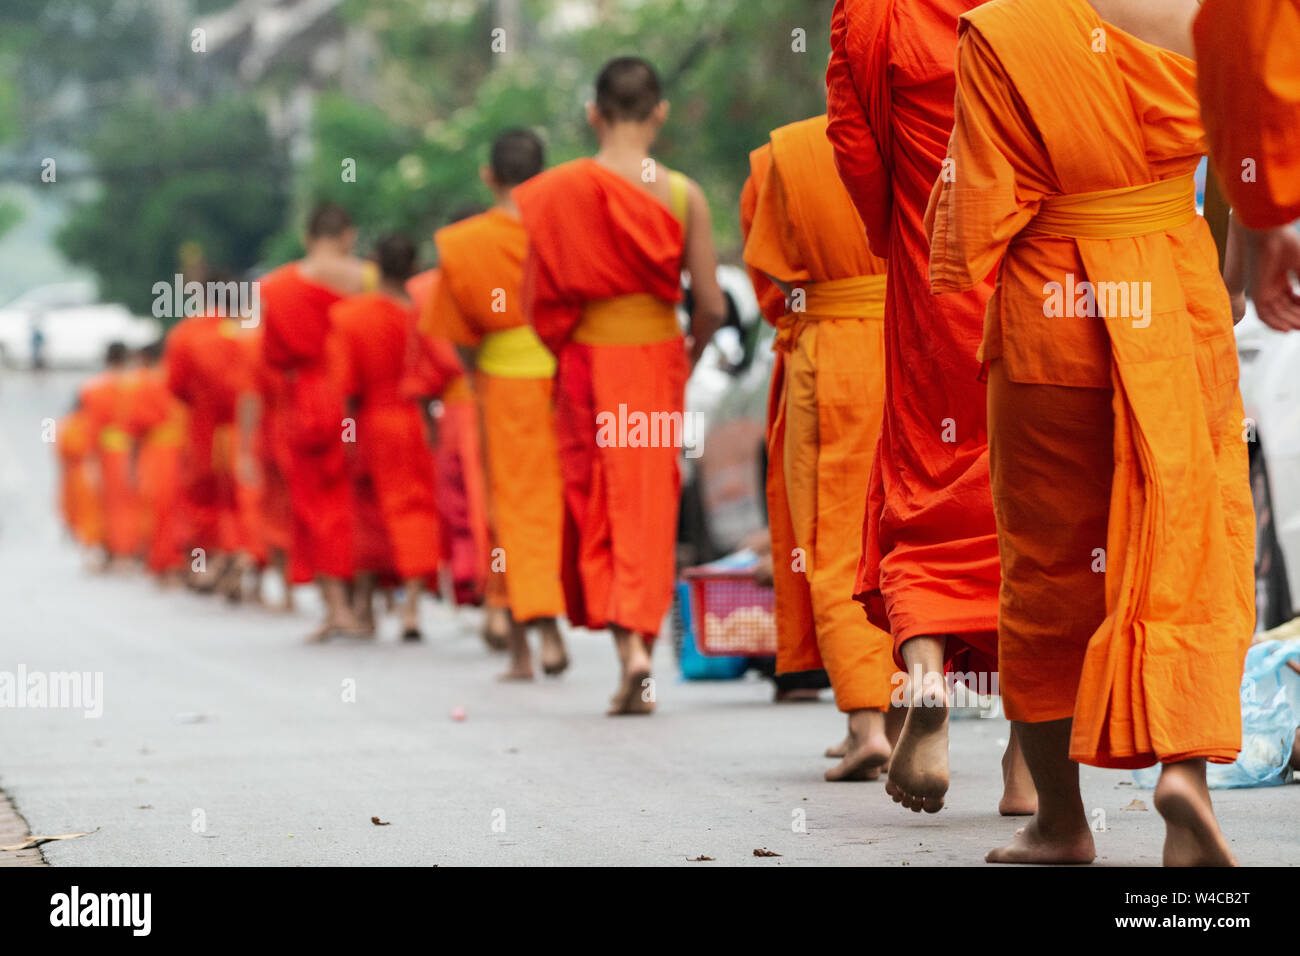 Laotian Buddhist monks walking along the street during morning alms giving ceremony in Luang Prabang, Laos Stock Photo